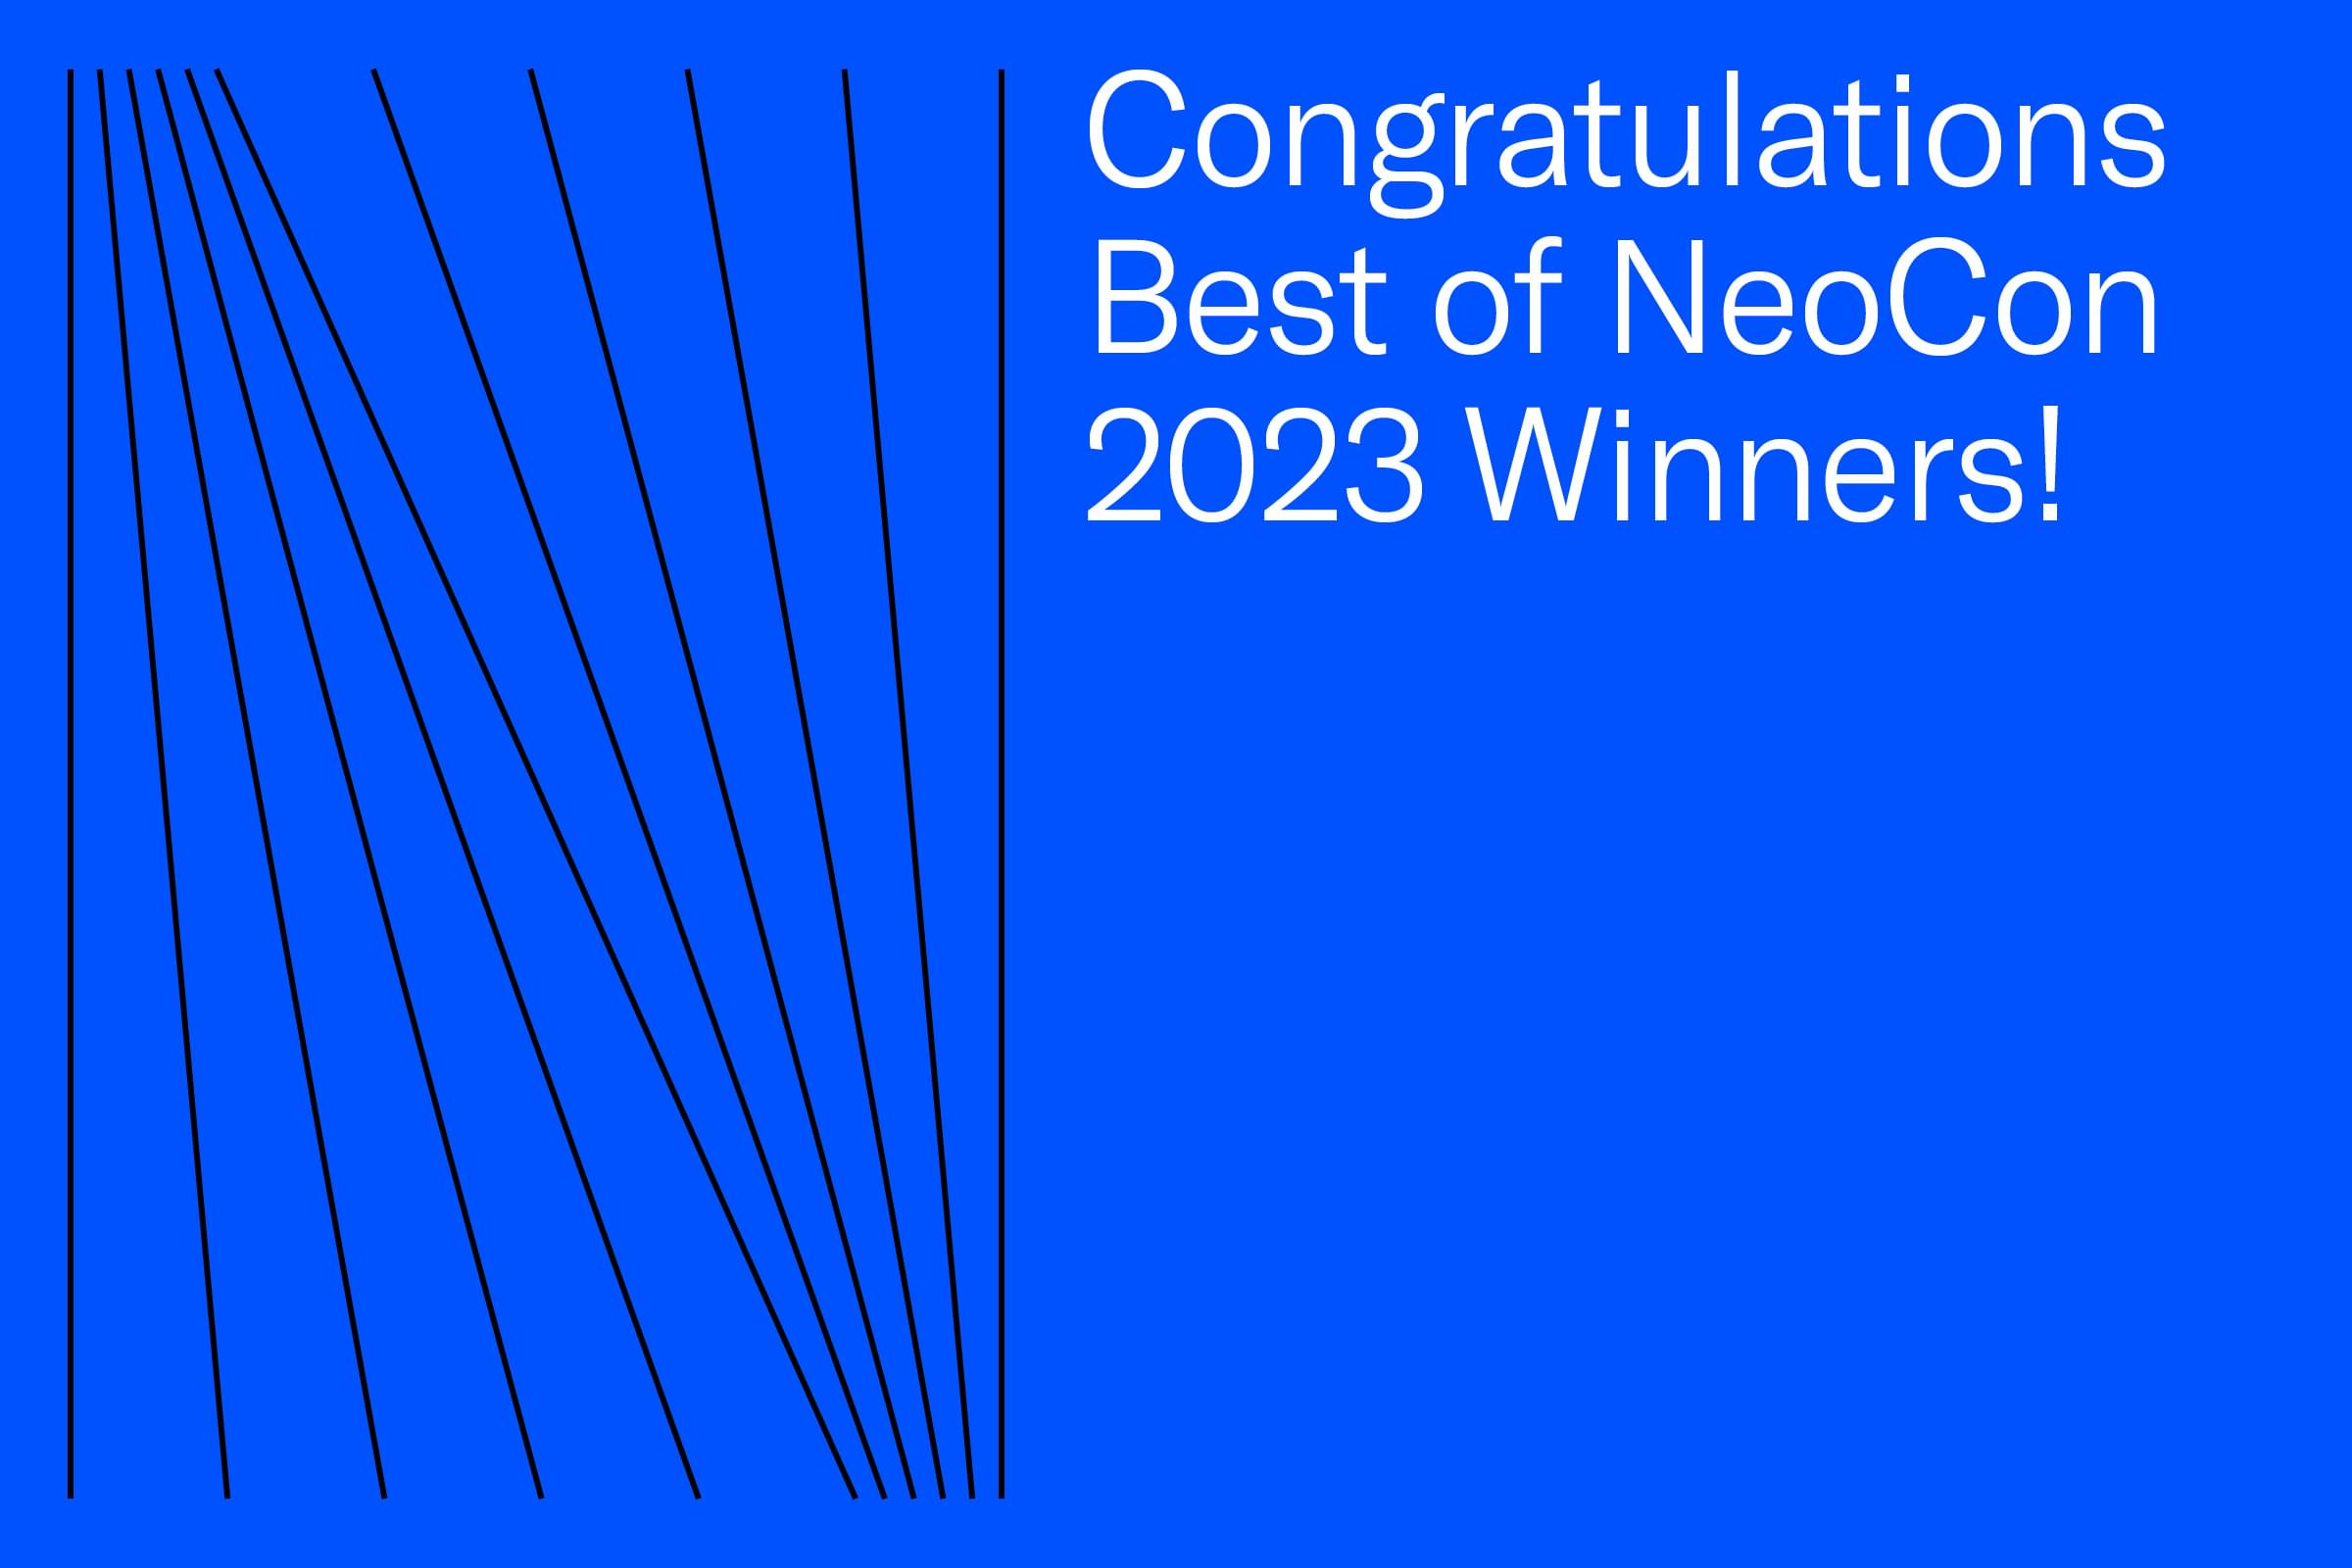 Congratulations to the Best of NeoCon 2023 Winners!